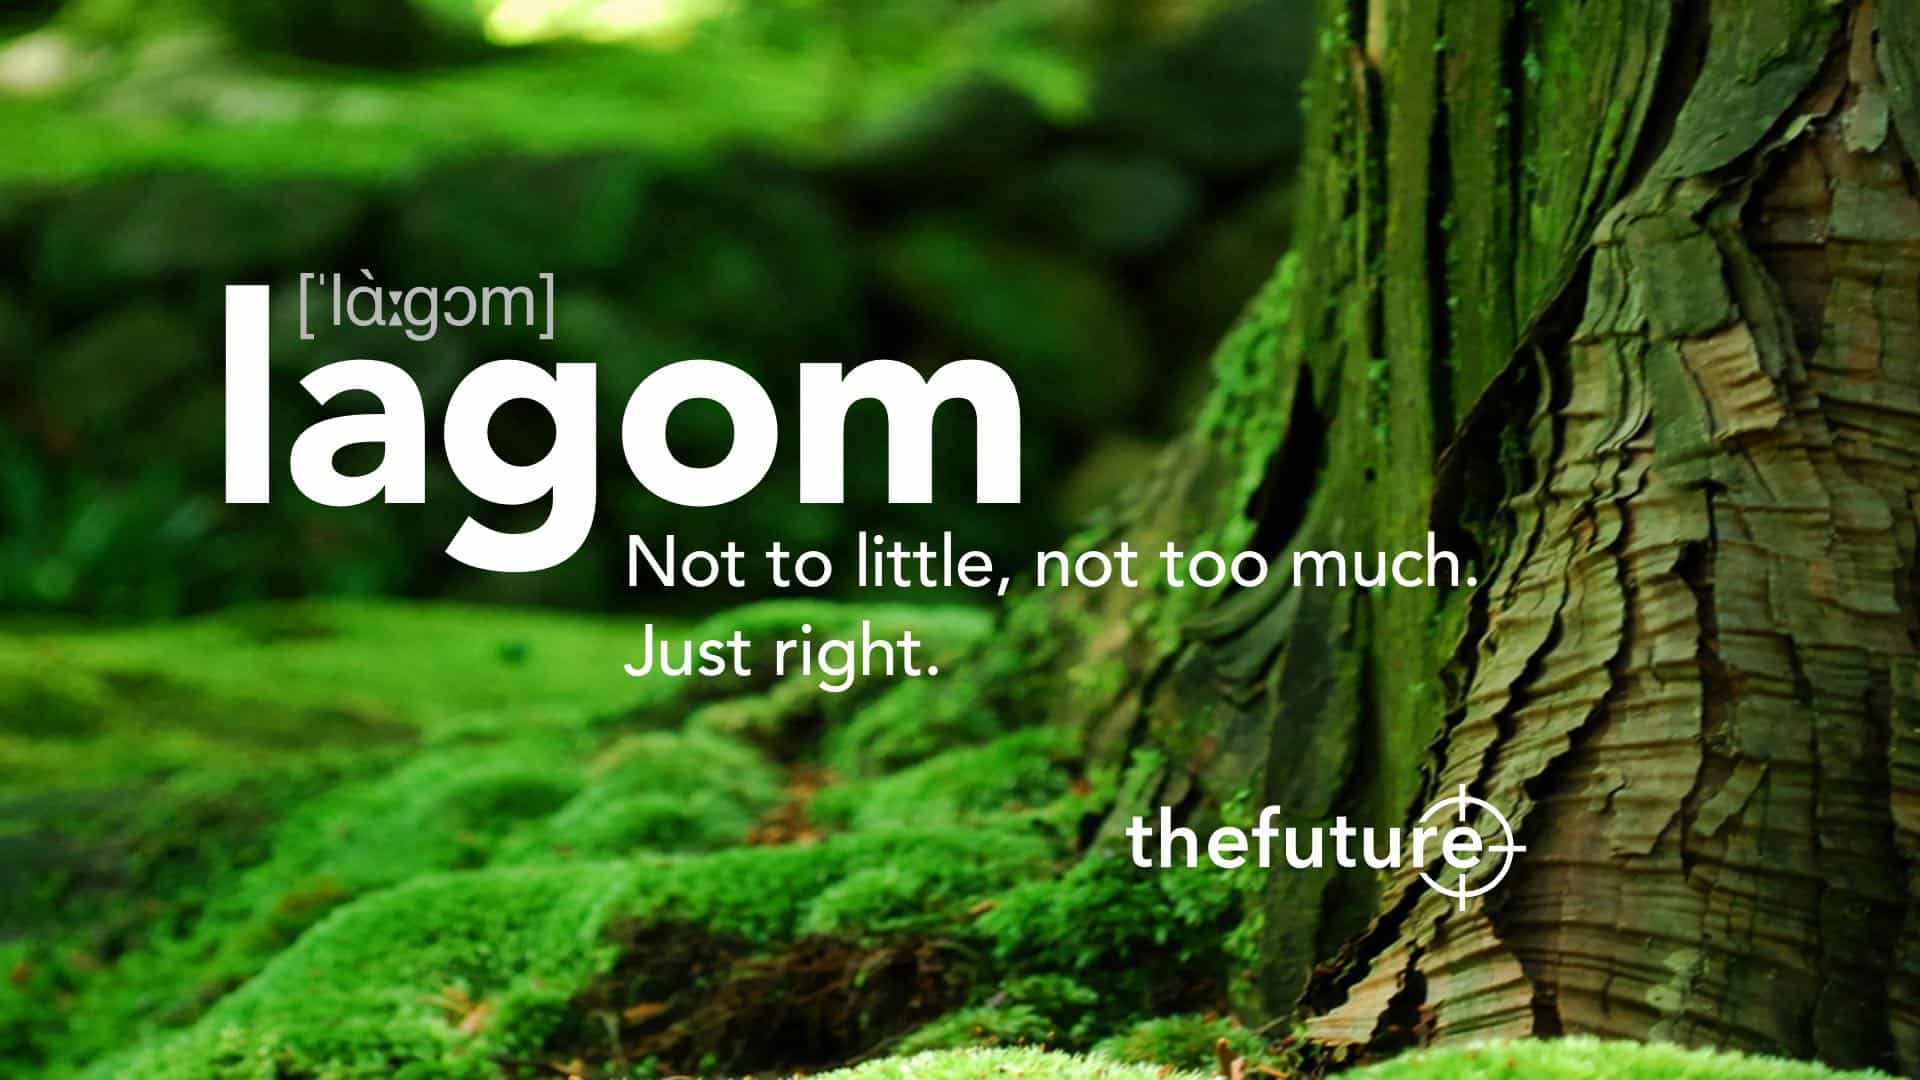 thefuture, Blogg, Lagom, Not-to-little, not-too-much, Just-right